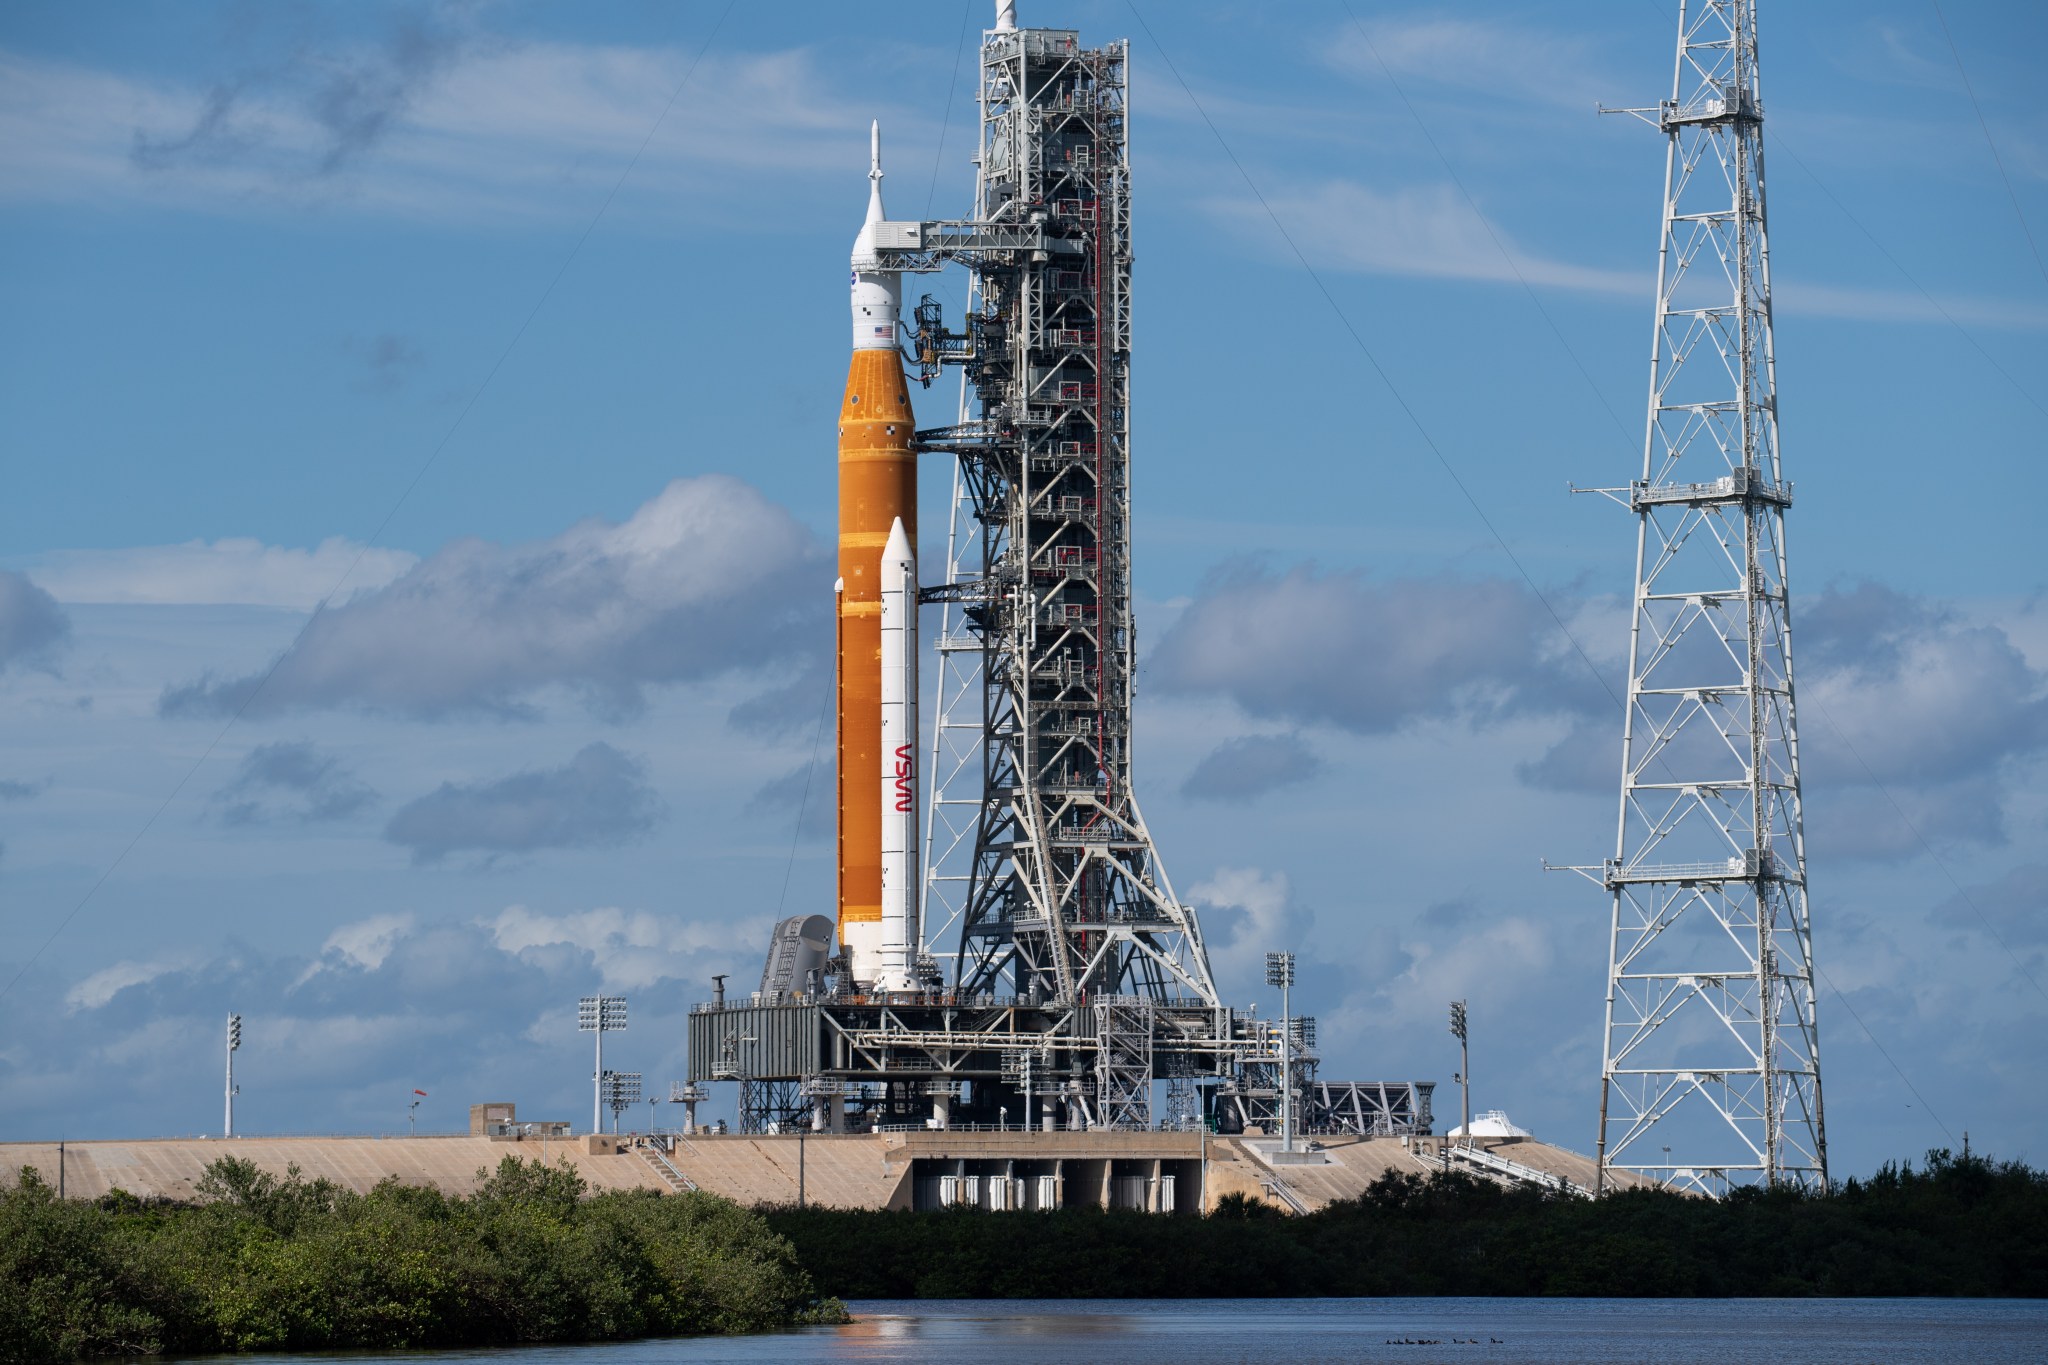 NASA’s Space Launch System (SLS) rocket with the Orion spacecraft aboard is seen atop the mobile launcher at Launch Pad 39B, Friday, Nov. 11, 2022, at NASA’s Kennedy Space Center in Florida.